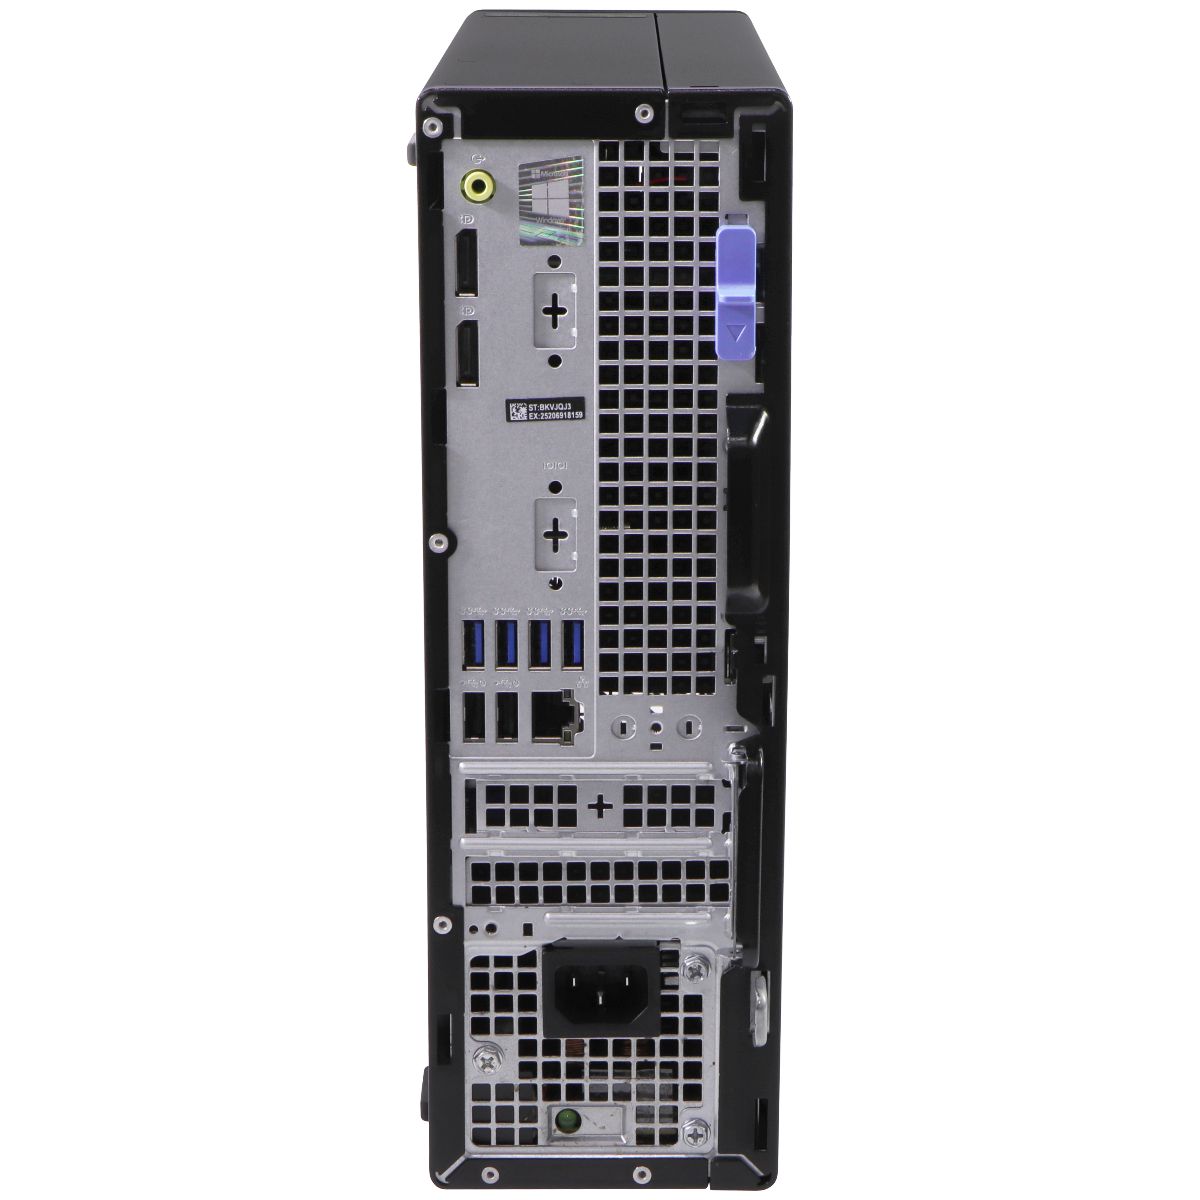 Dell OptiPlex 3090 Tower PC D15S Intel i5-10505 / 256GB/8GB Windows 10 Home PC Desktops & All-In-Ones Dell    - Simple Cell Bulk Wholesale Pricing - USA Seller